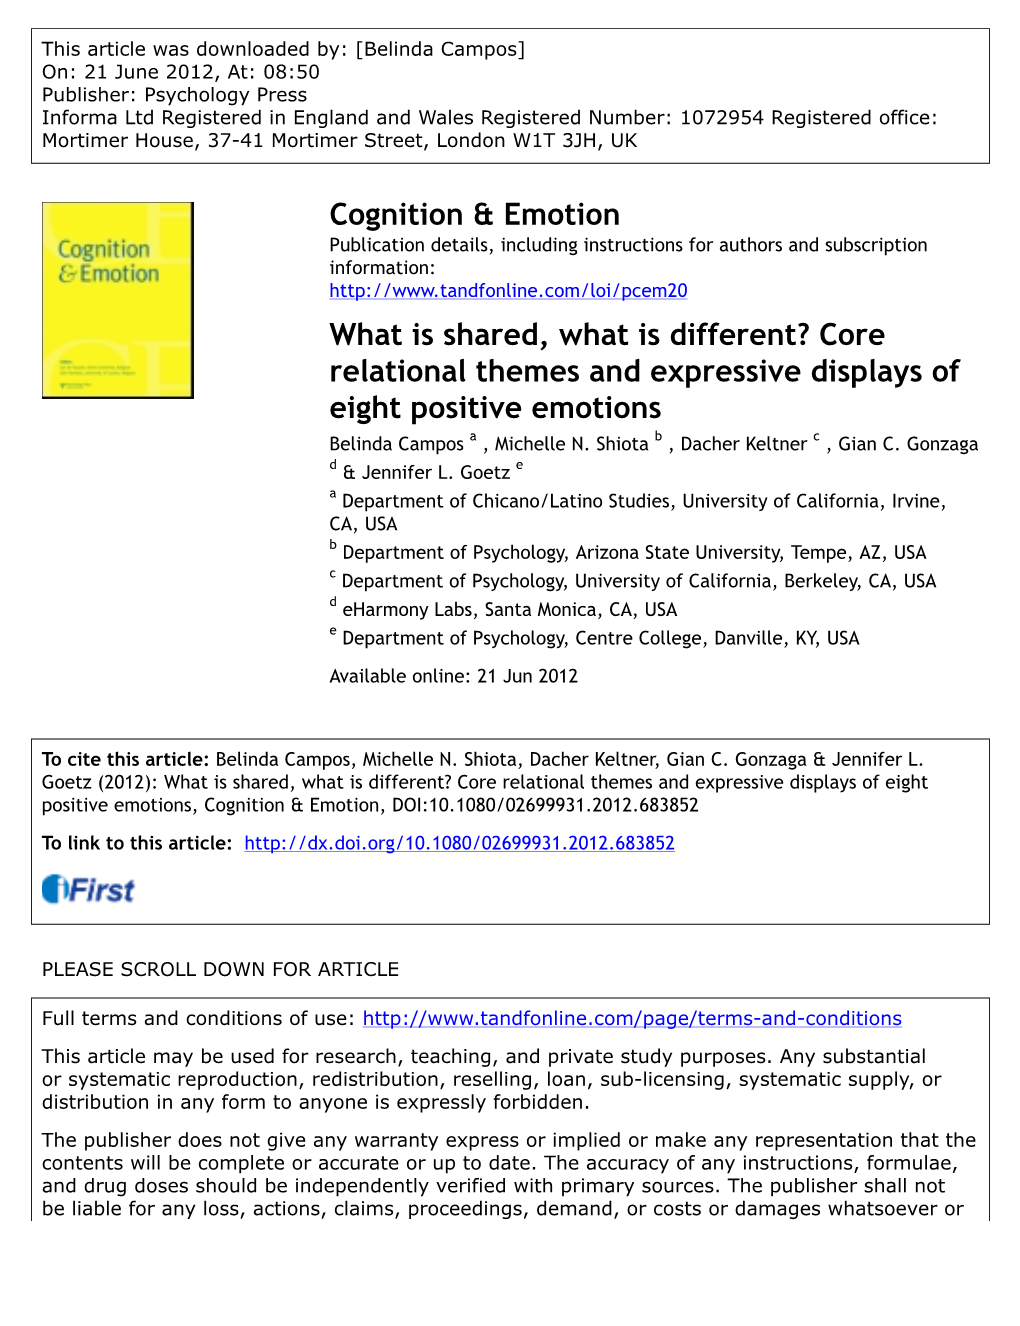 Core Relational Themes and Expressive Displays of Eight Positive Emotions Belinda Campos a , Michelle N